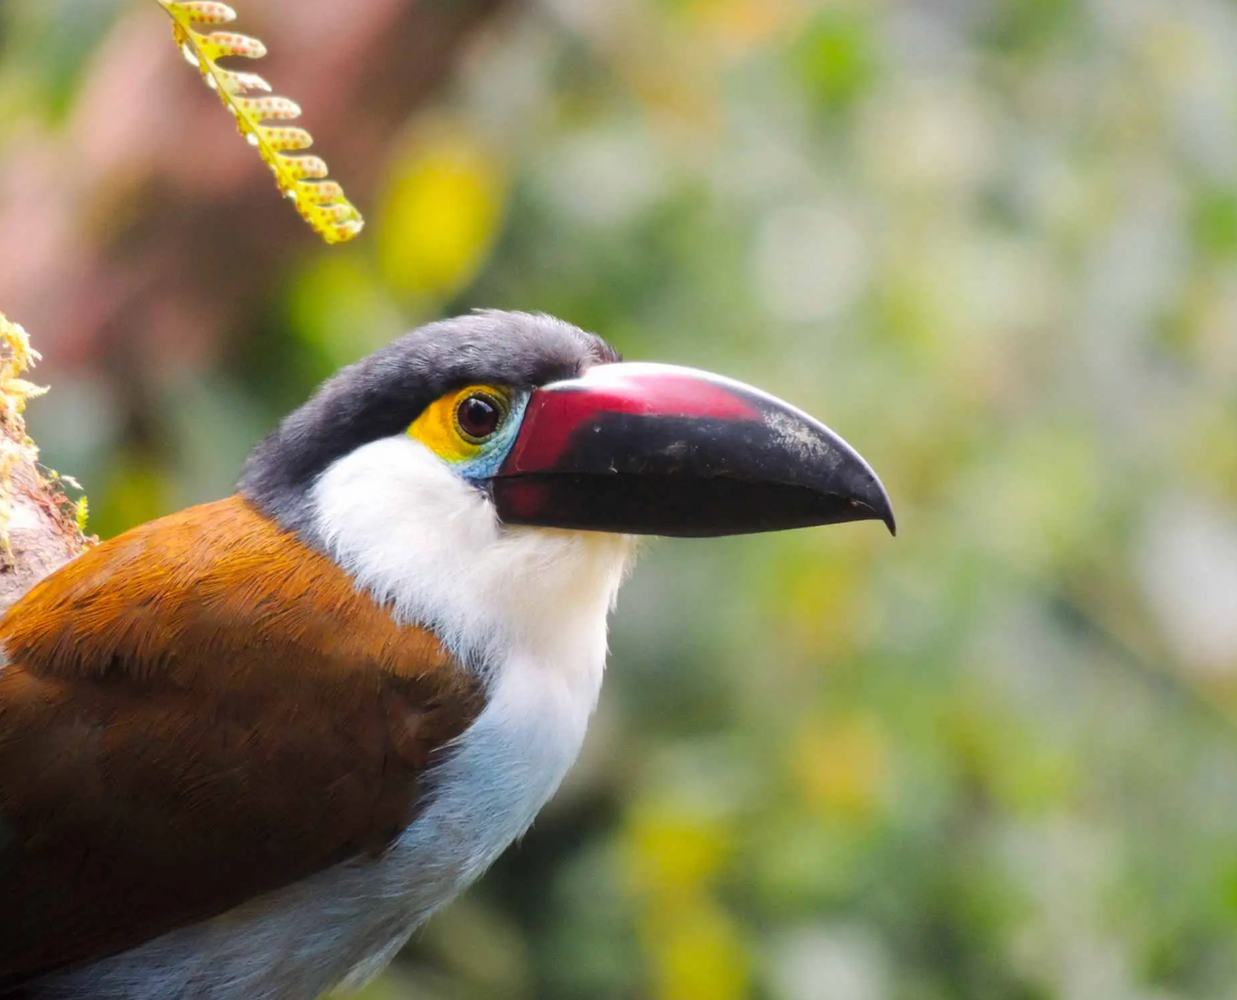 Life List in Colombia: The Coffee Triangle & The Colombia Birdfair